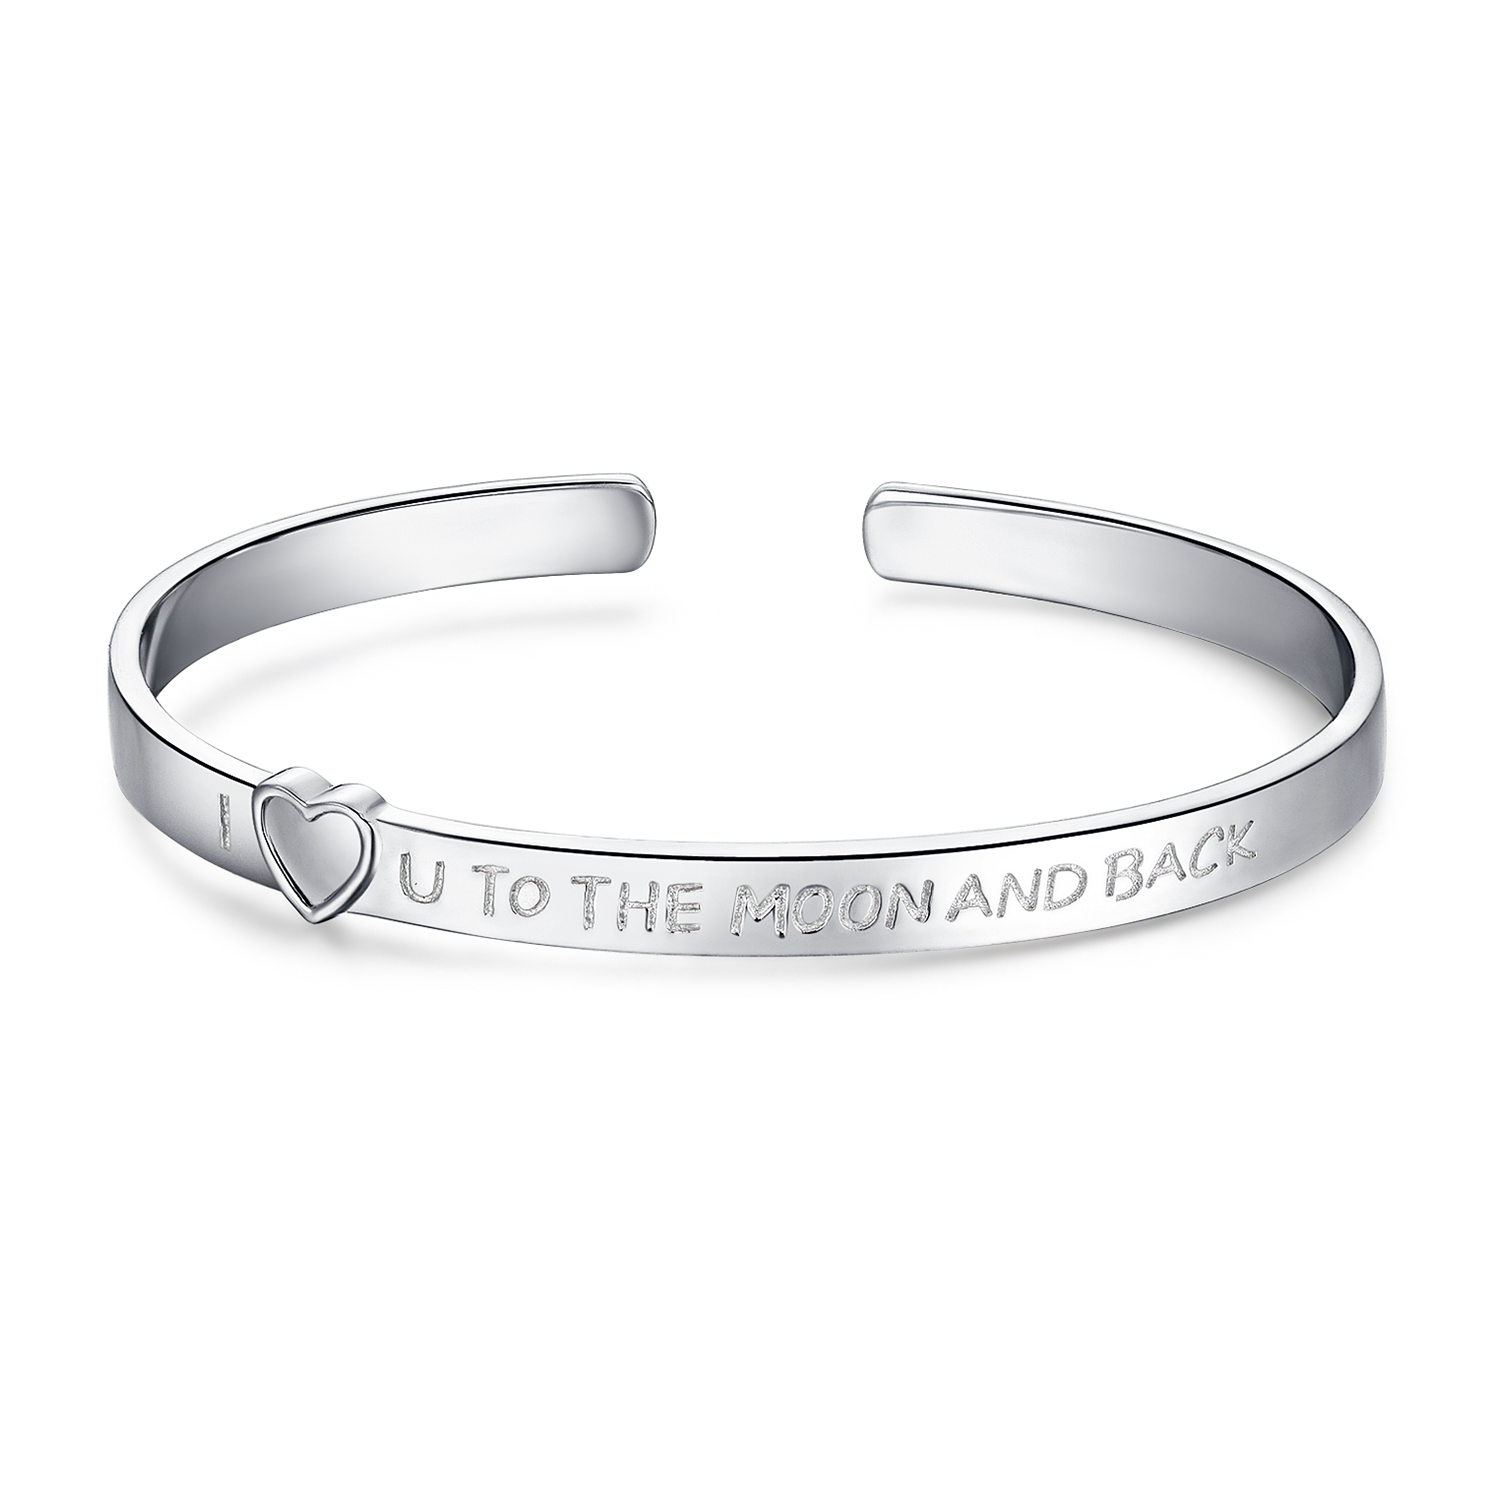  I Love You To The Moon And Back Cuff Bangle Bracelet Sterling Silver JewelryPalace